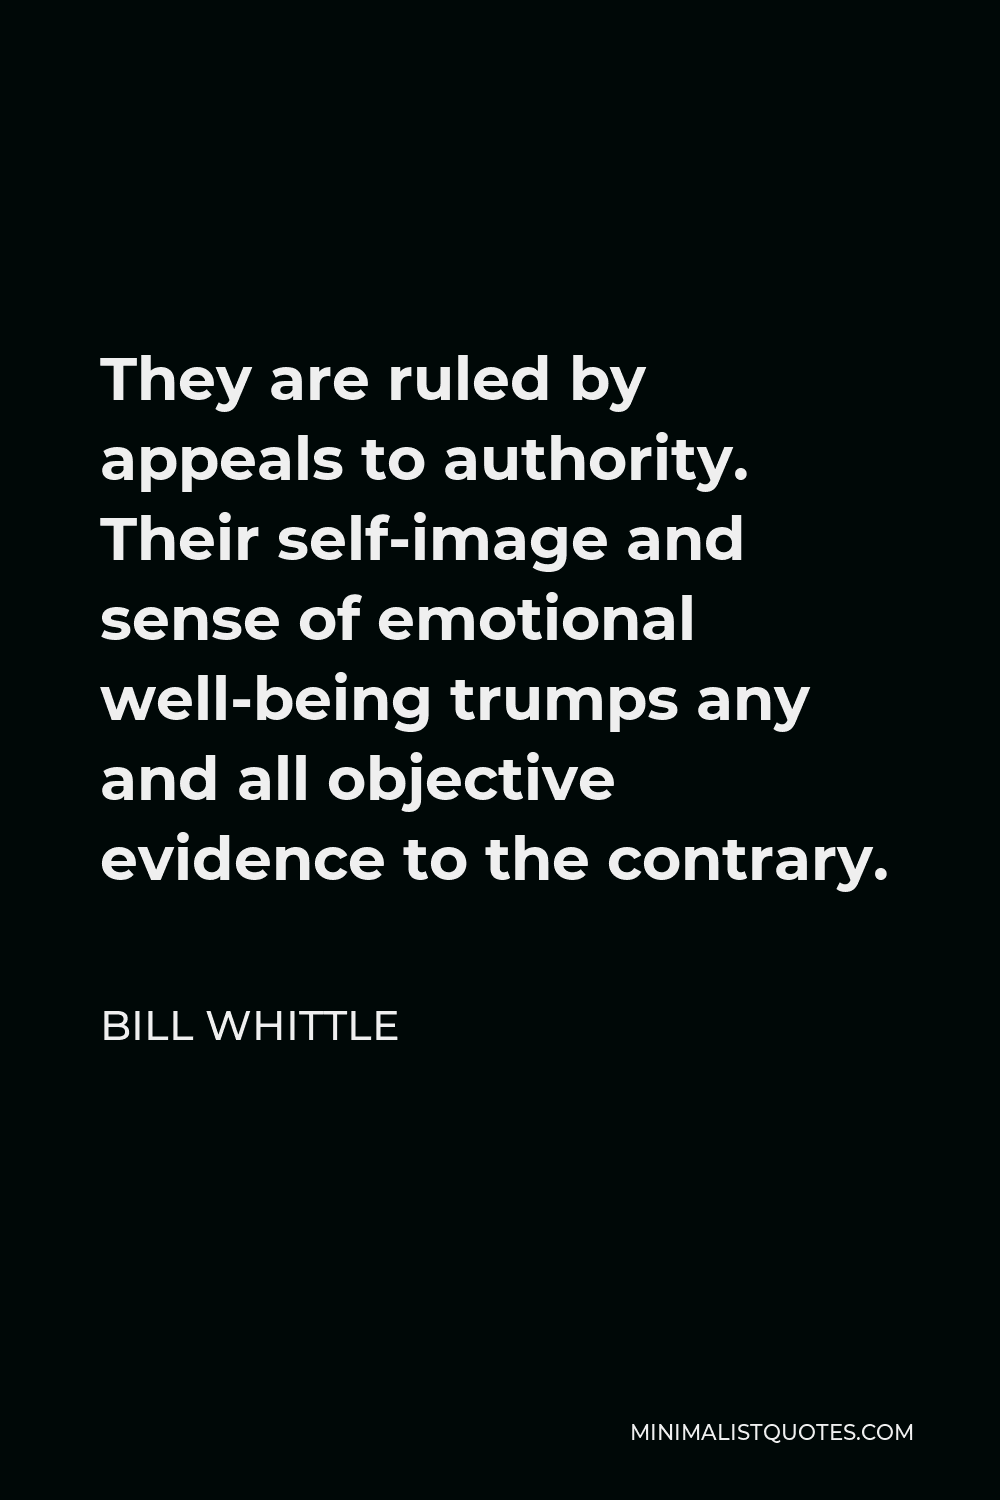 Bill Whittle Quote - They are ruled by appeals to authority. Their self-image and sense of emotional well-being trumps any and all objective evidence to the contrary.